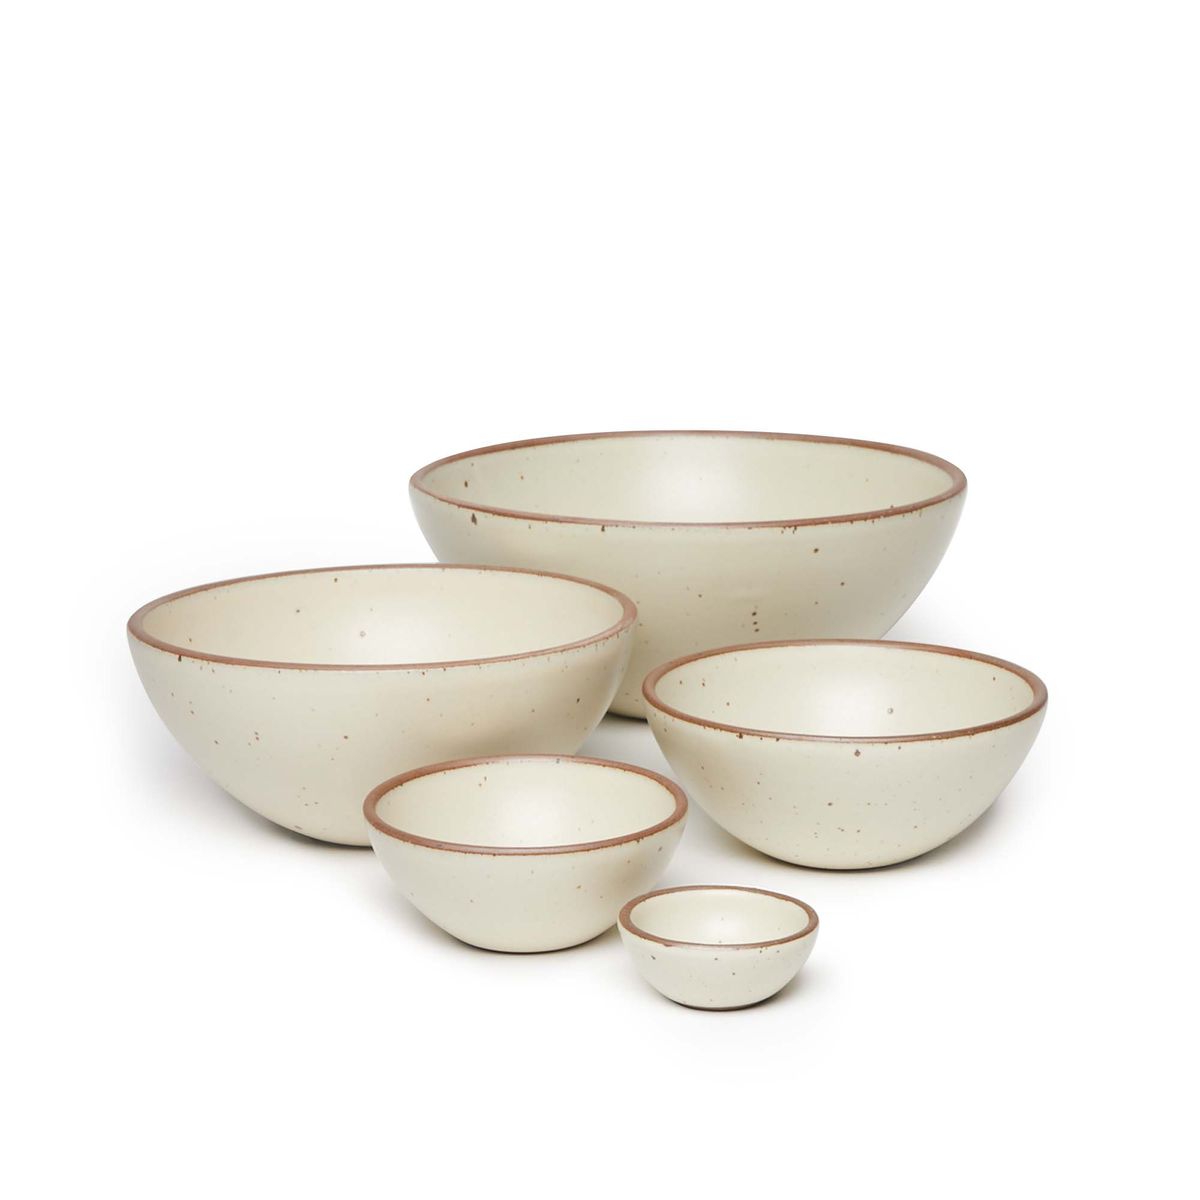 A bitty bowl, ice cream bowl, soup bowl, popcorn bowl, and mixing bowl paired together in a warm, tan-toned, off-white color featuring iron speckles